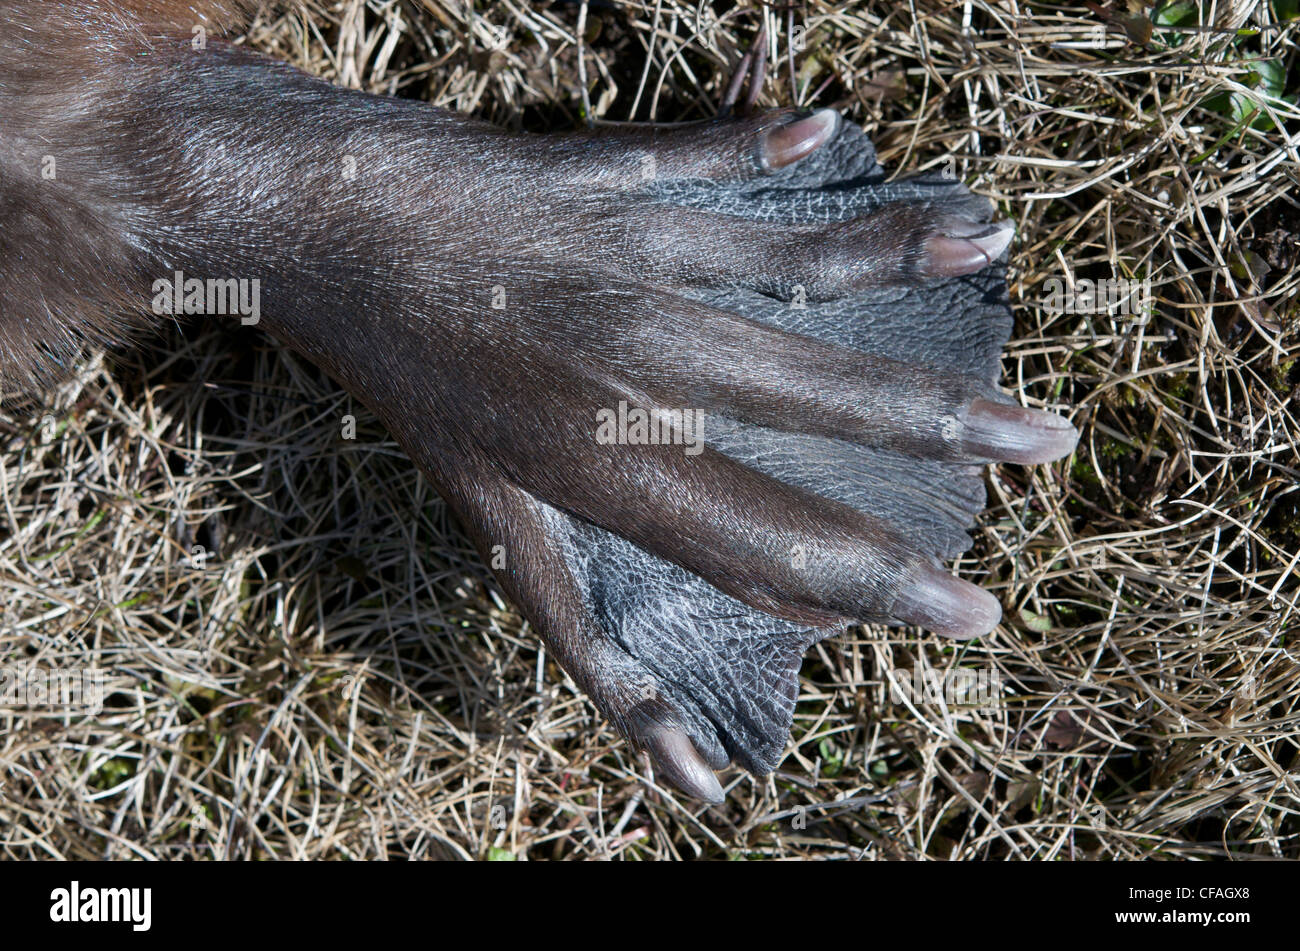 Close-up of beavers webbed foot, or paw adapted for swimming. (Castor canadensis). Northern Ontario, Canada. Stock Photo